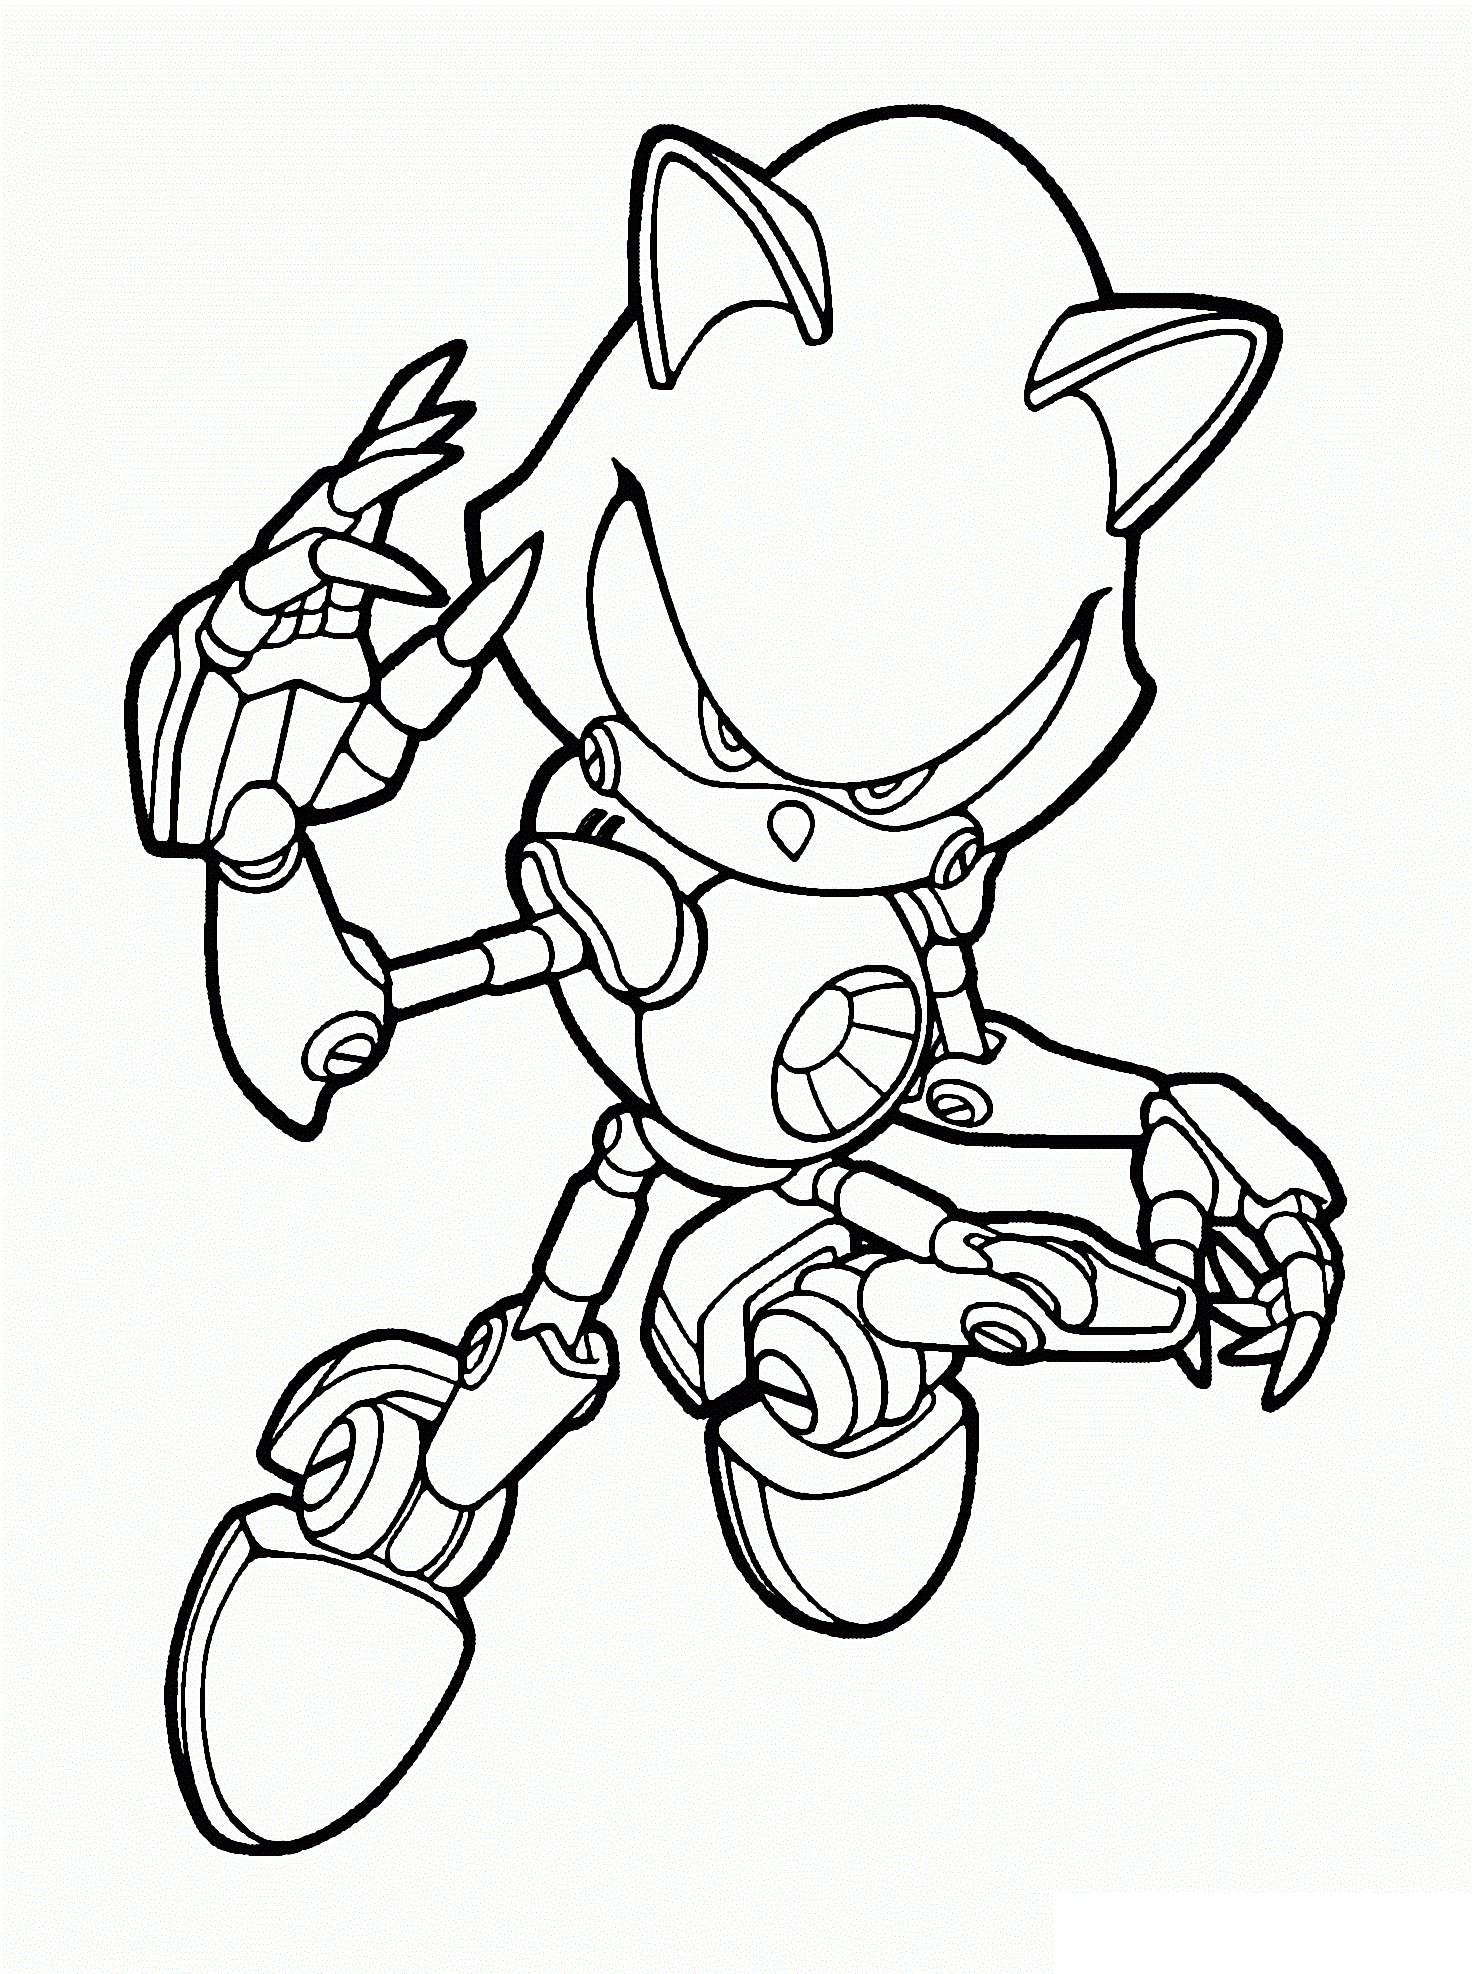 Metal Sonic Coloring Page